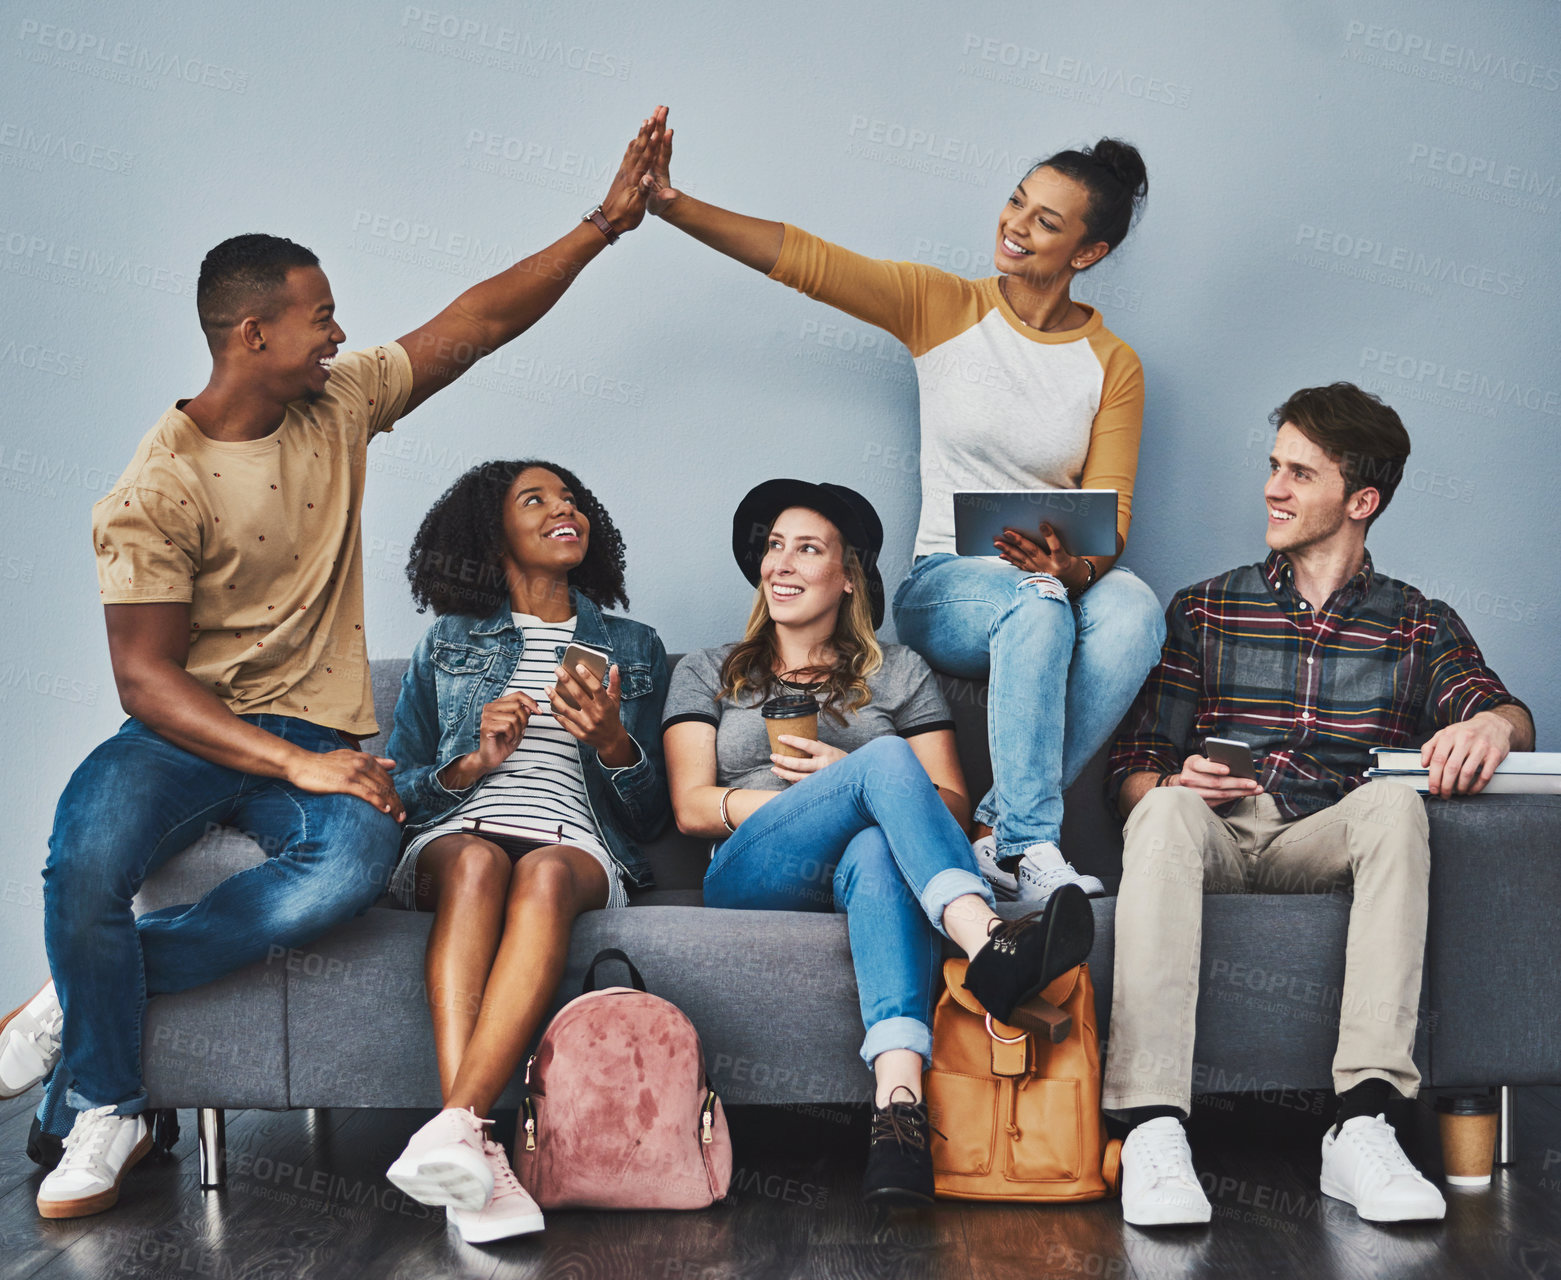 Buy stock photo Studio shot of a young man and woman giving each other a high five while hanging out with their friends